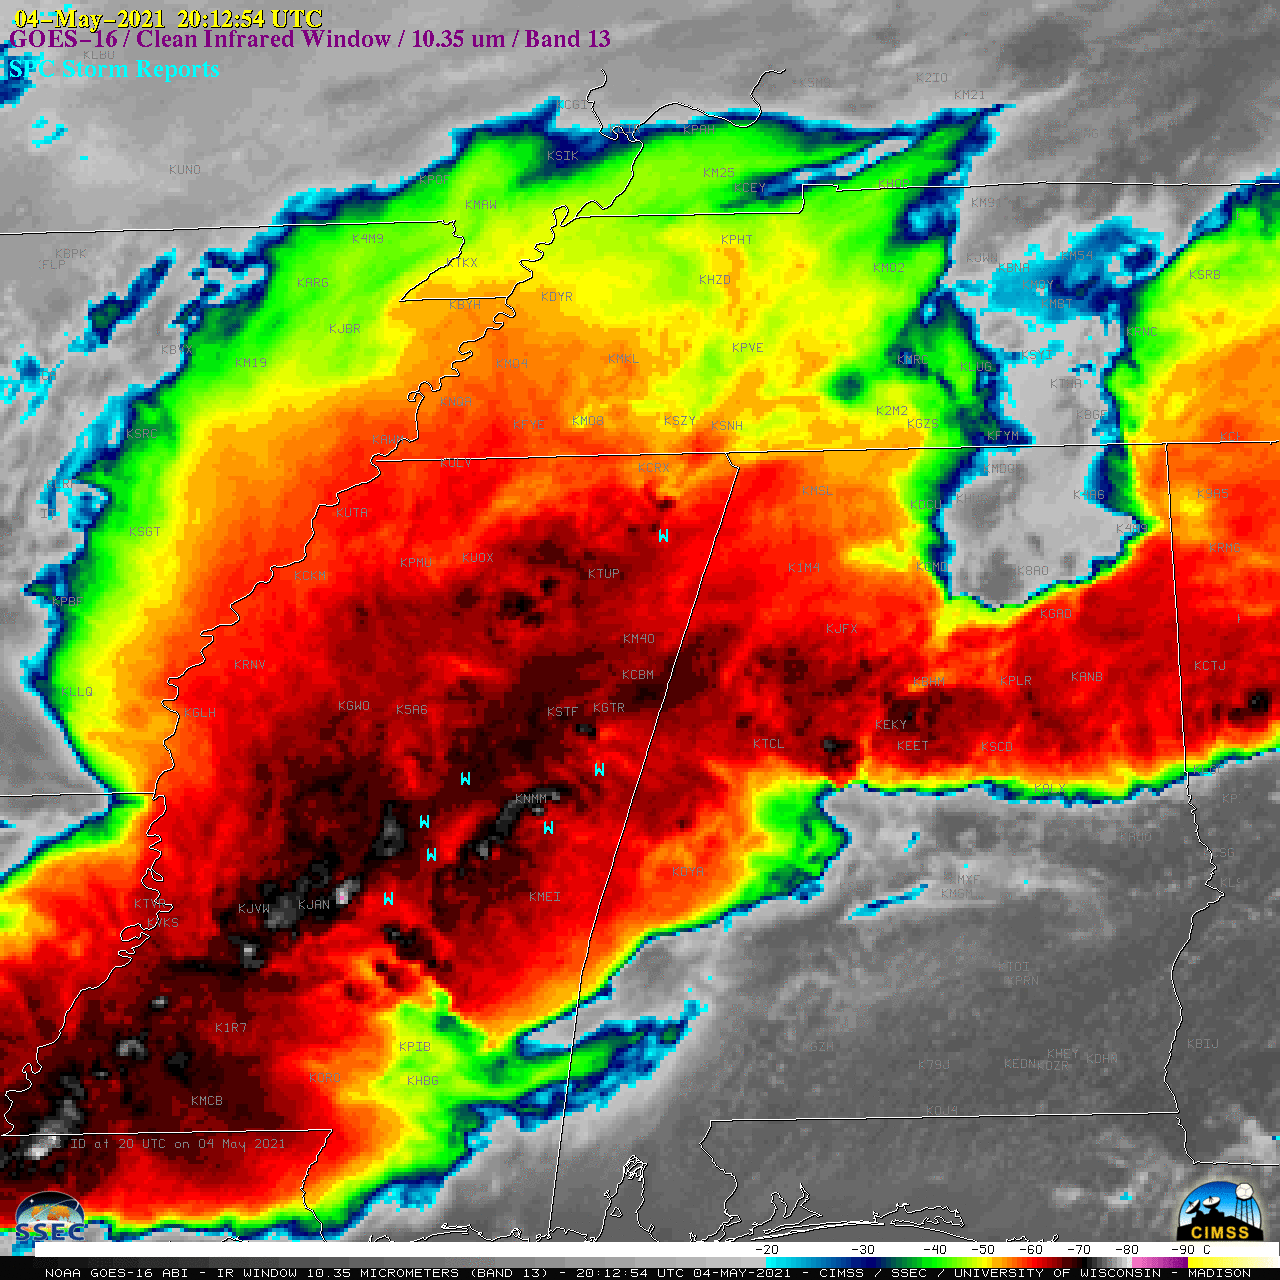 GOES-16 “Clean” Infrared Window (10.35 µm) images, with SPC Storm Reports plotted in cyan [click to play animation | MP4]